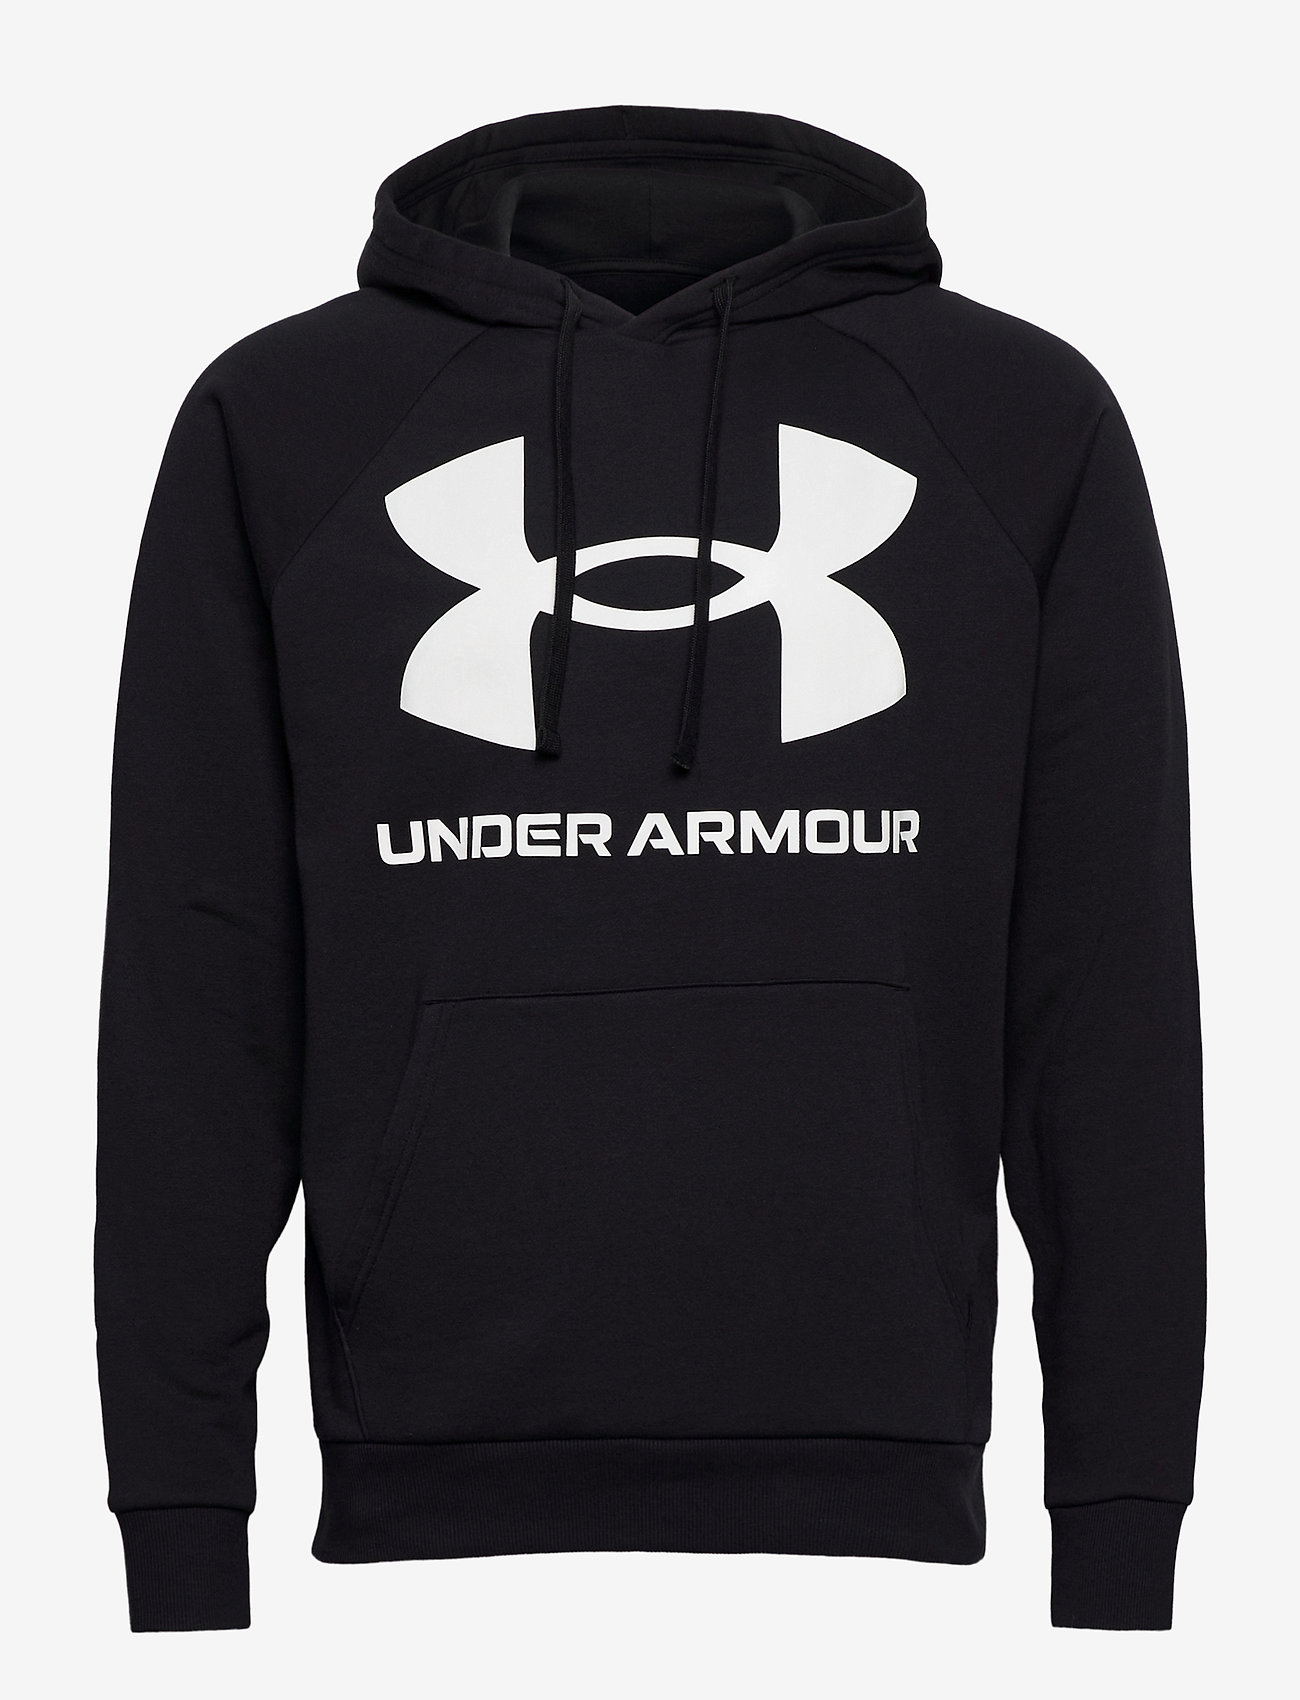 under armour returns phone number